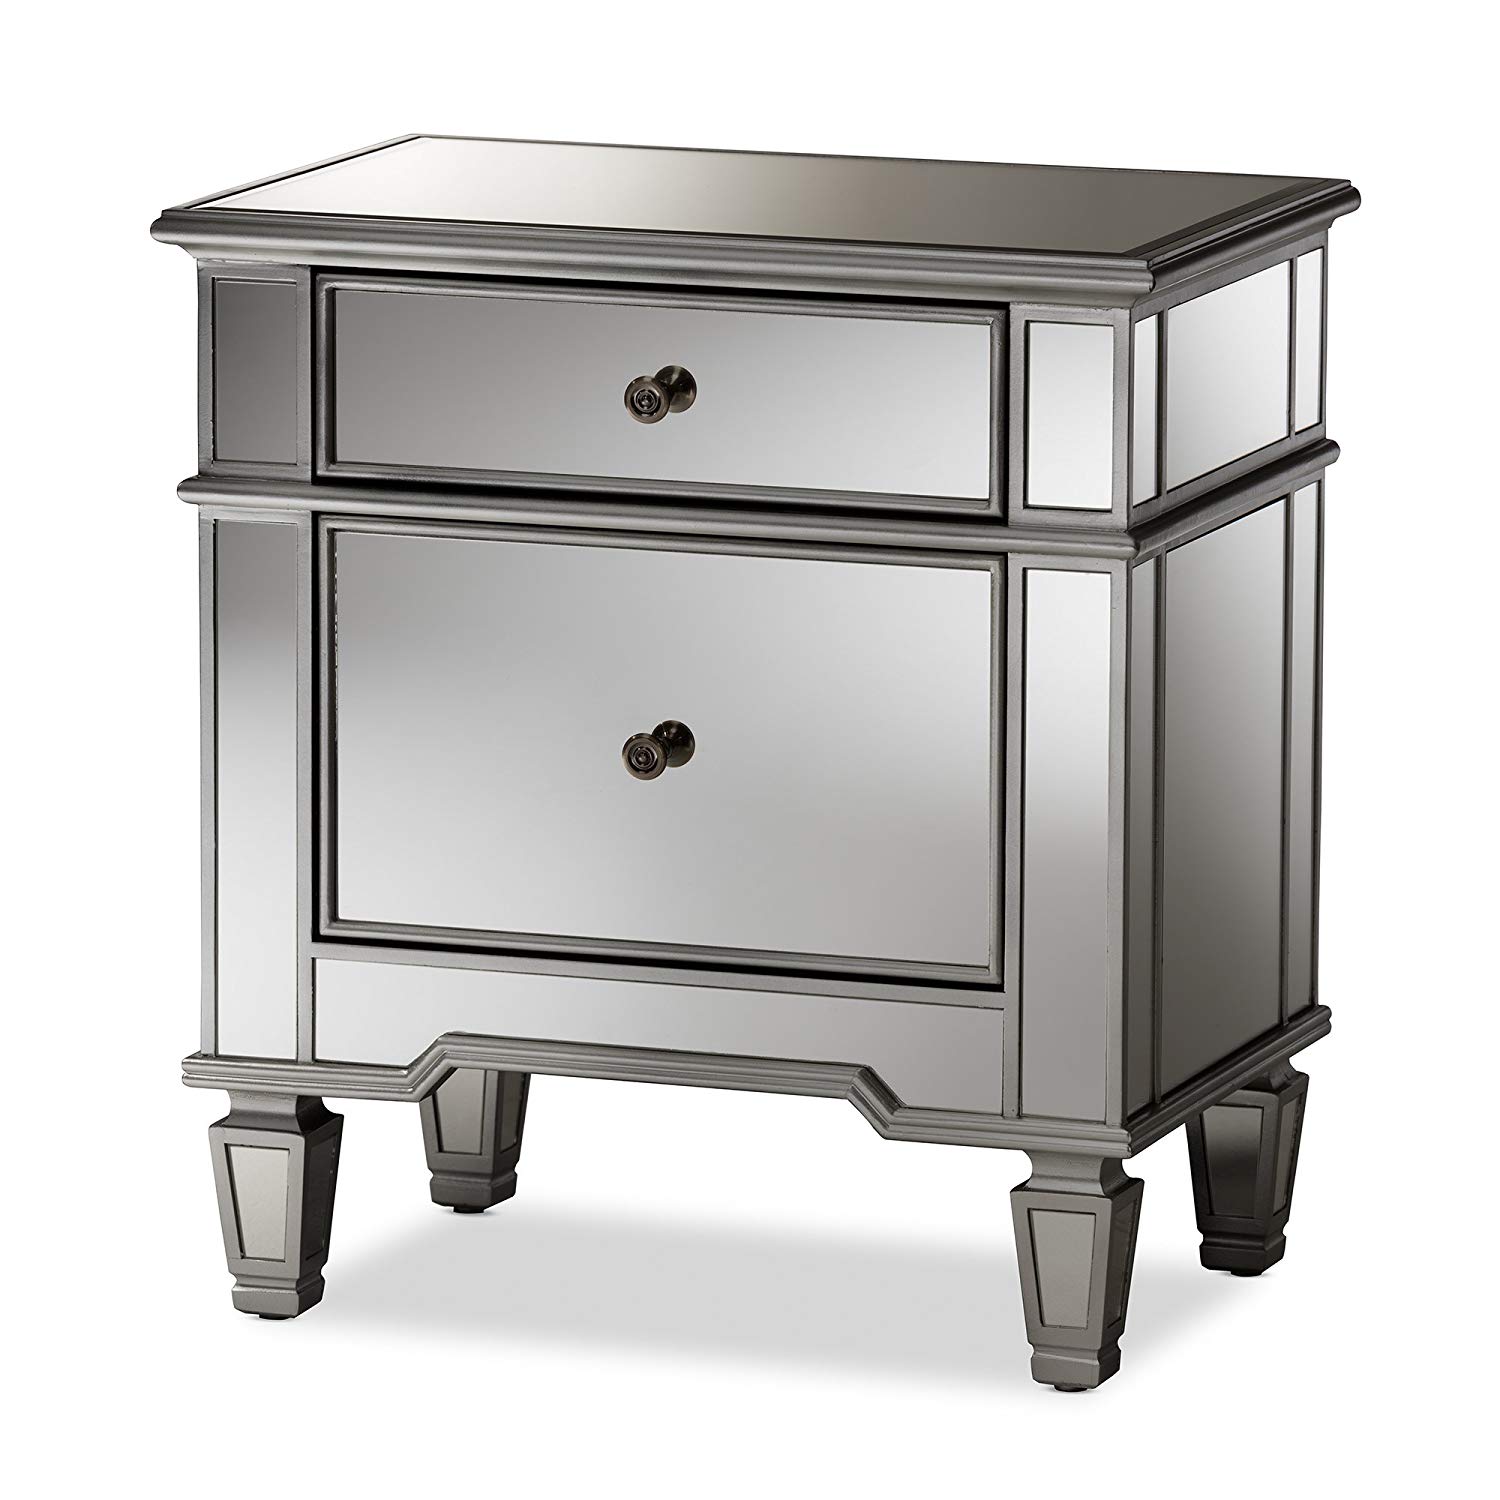 baxton studio susanne hollywood regency glamour style mirrored accent table drawer nightstand silver kitchen dining with drink cooler inch round tablecloth acacia wood furniture